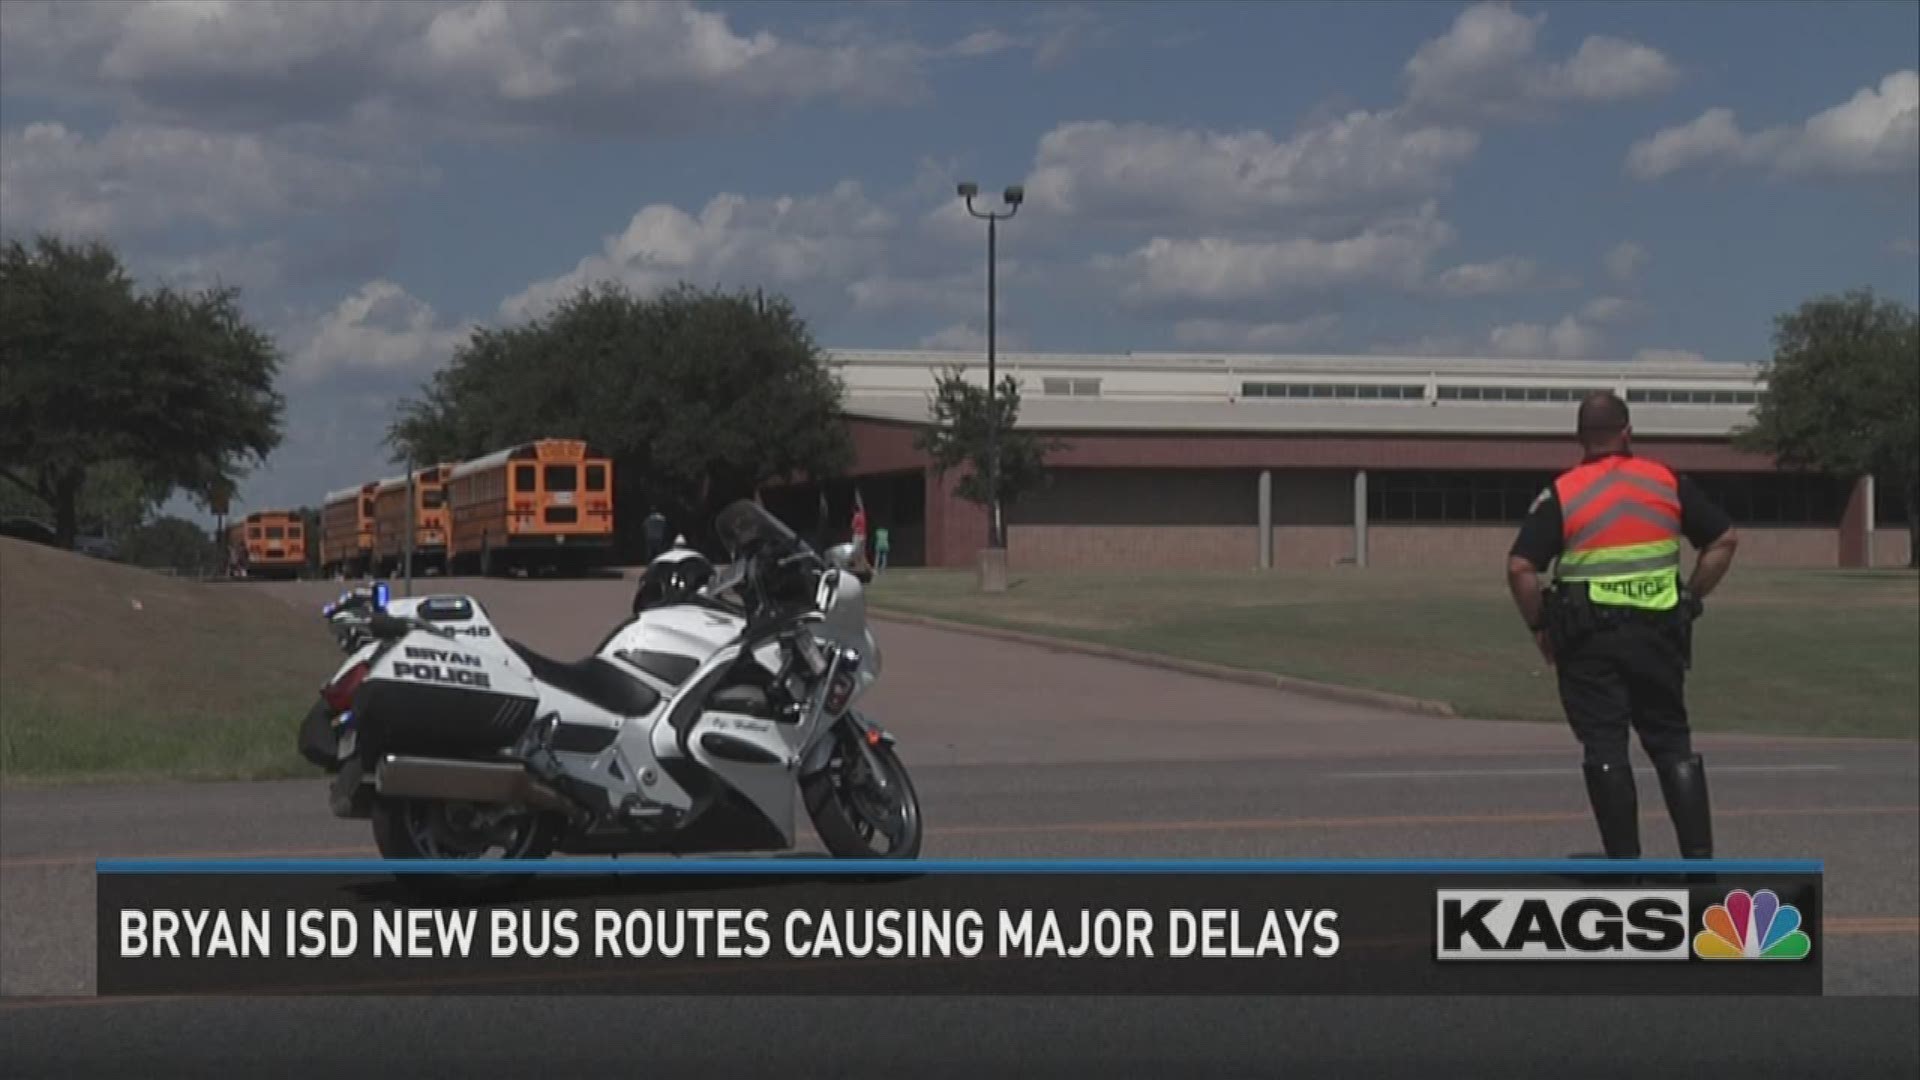 Some families are wondering when bus route issues will be improved.